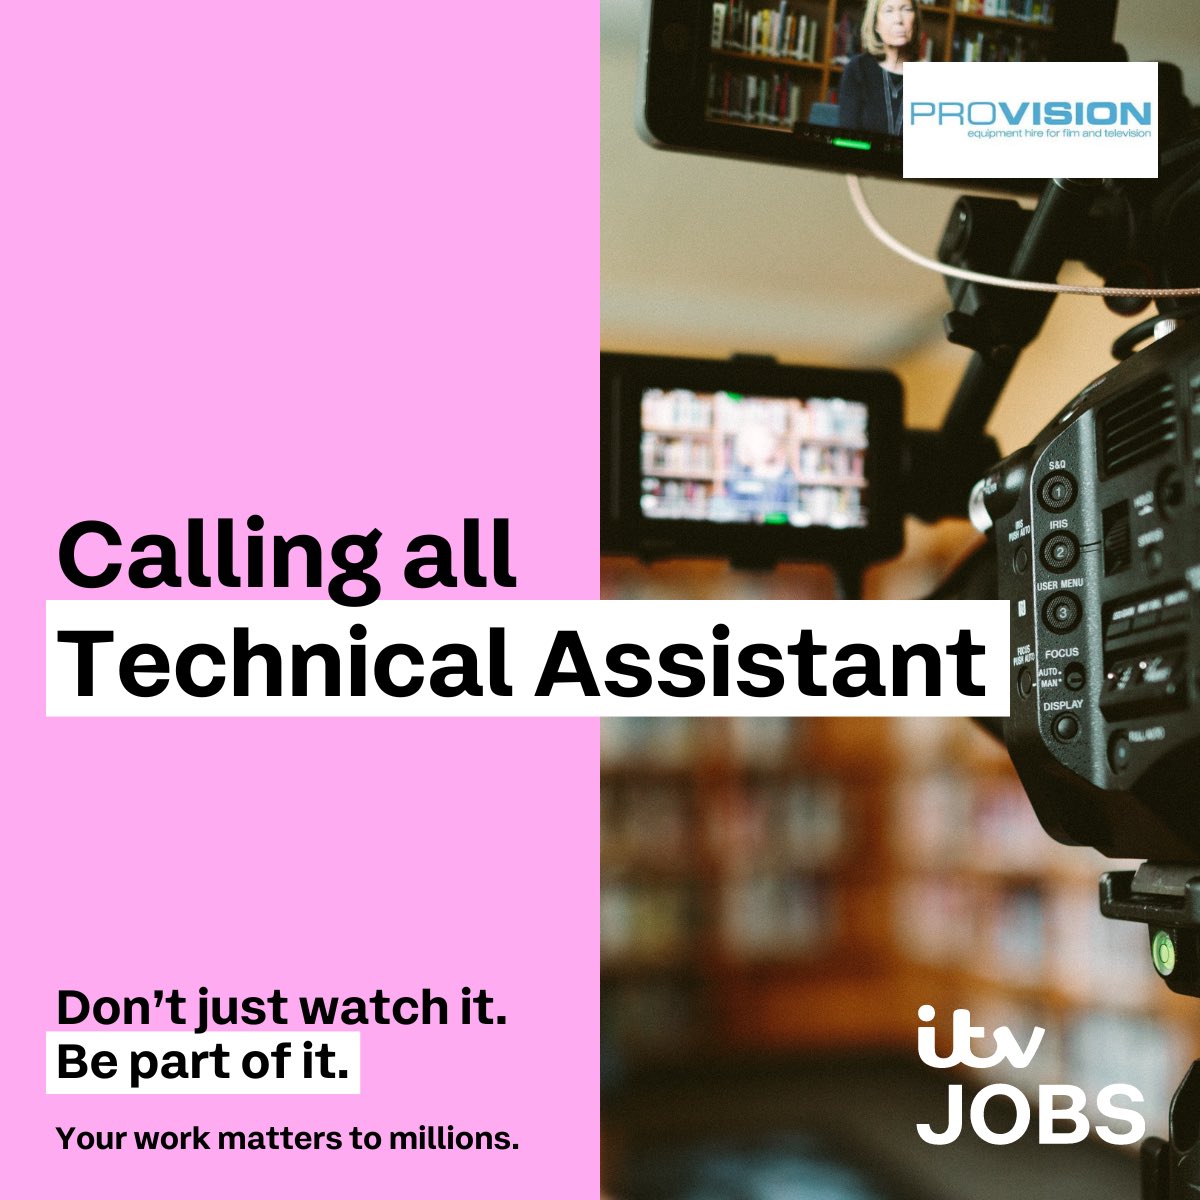 #JobAlert
@itv #ProVision are looking for a #TechnicalAssistant on a 12 Months FTC in #Manchester
Hiring Range: £21,325 per annum
Closing date: Sunday 19th March 2023 
Full details here:
n.rfer.us/ITVg7l3Hw
Quote #LookBeyondTheList when applying